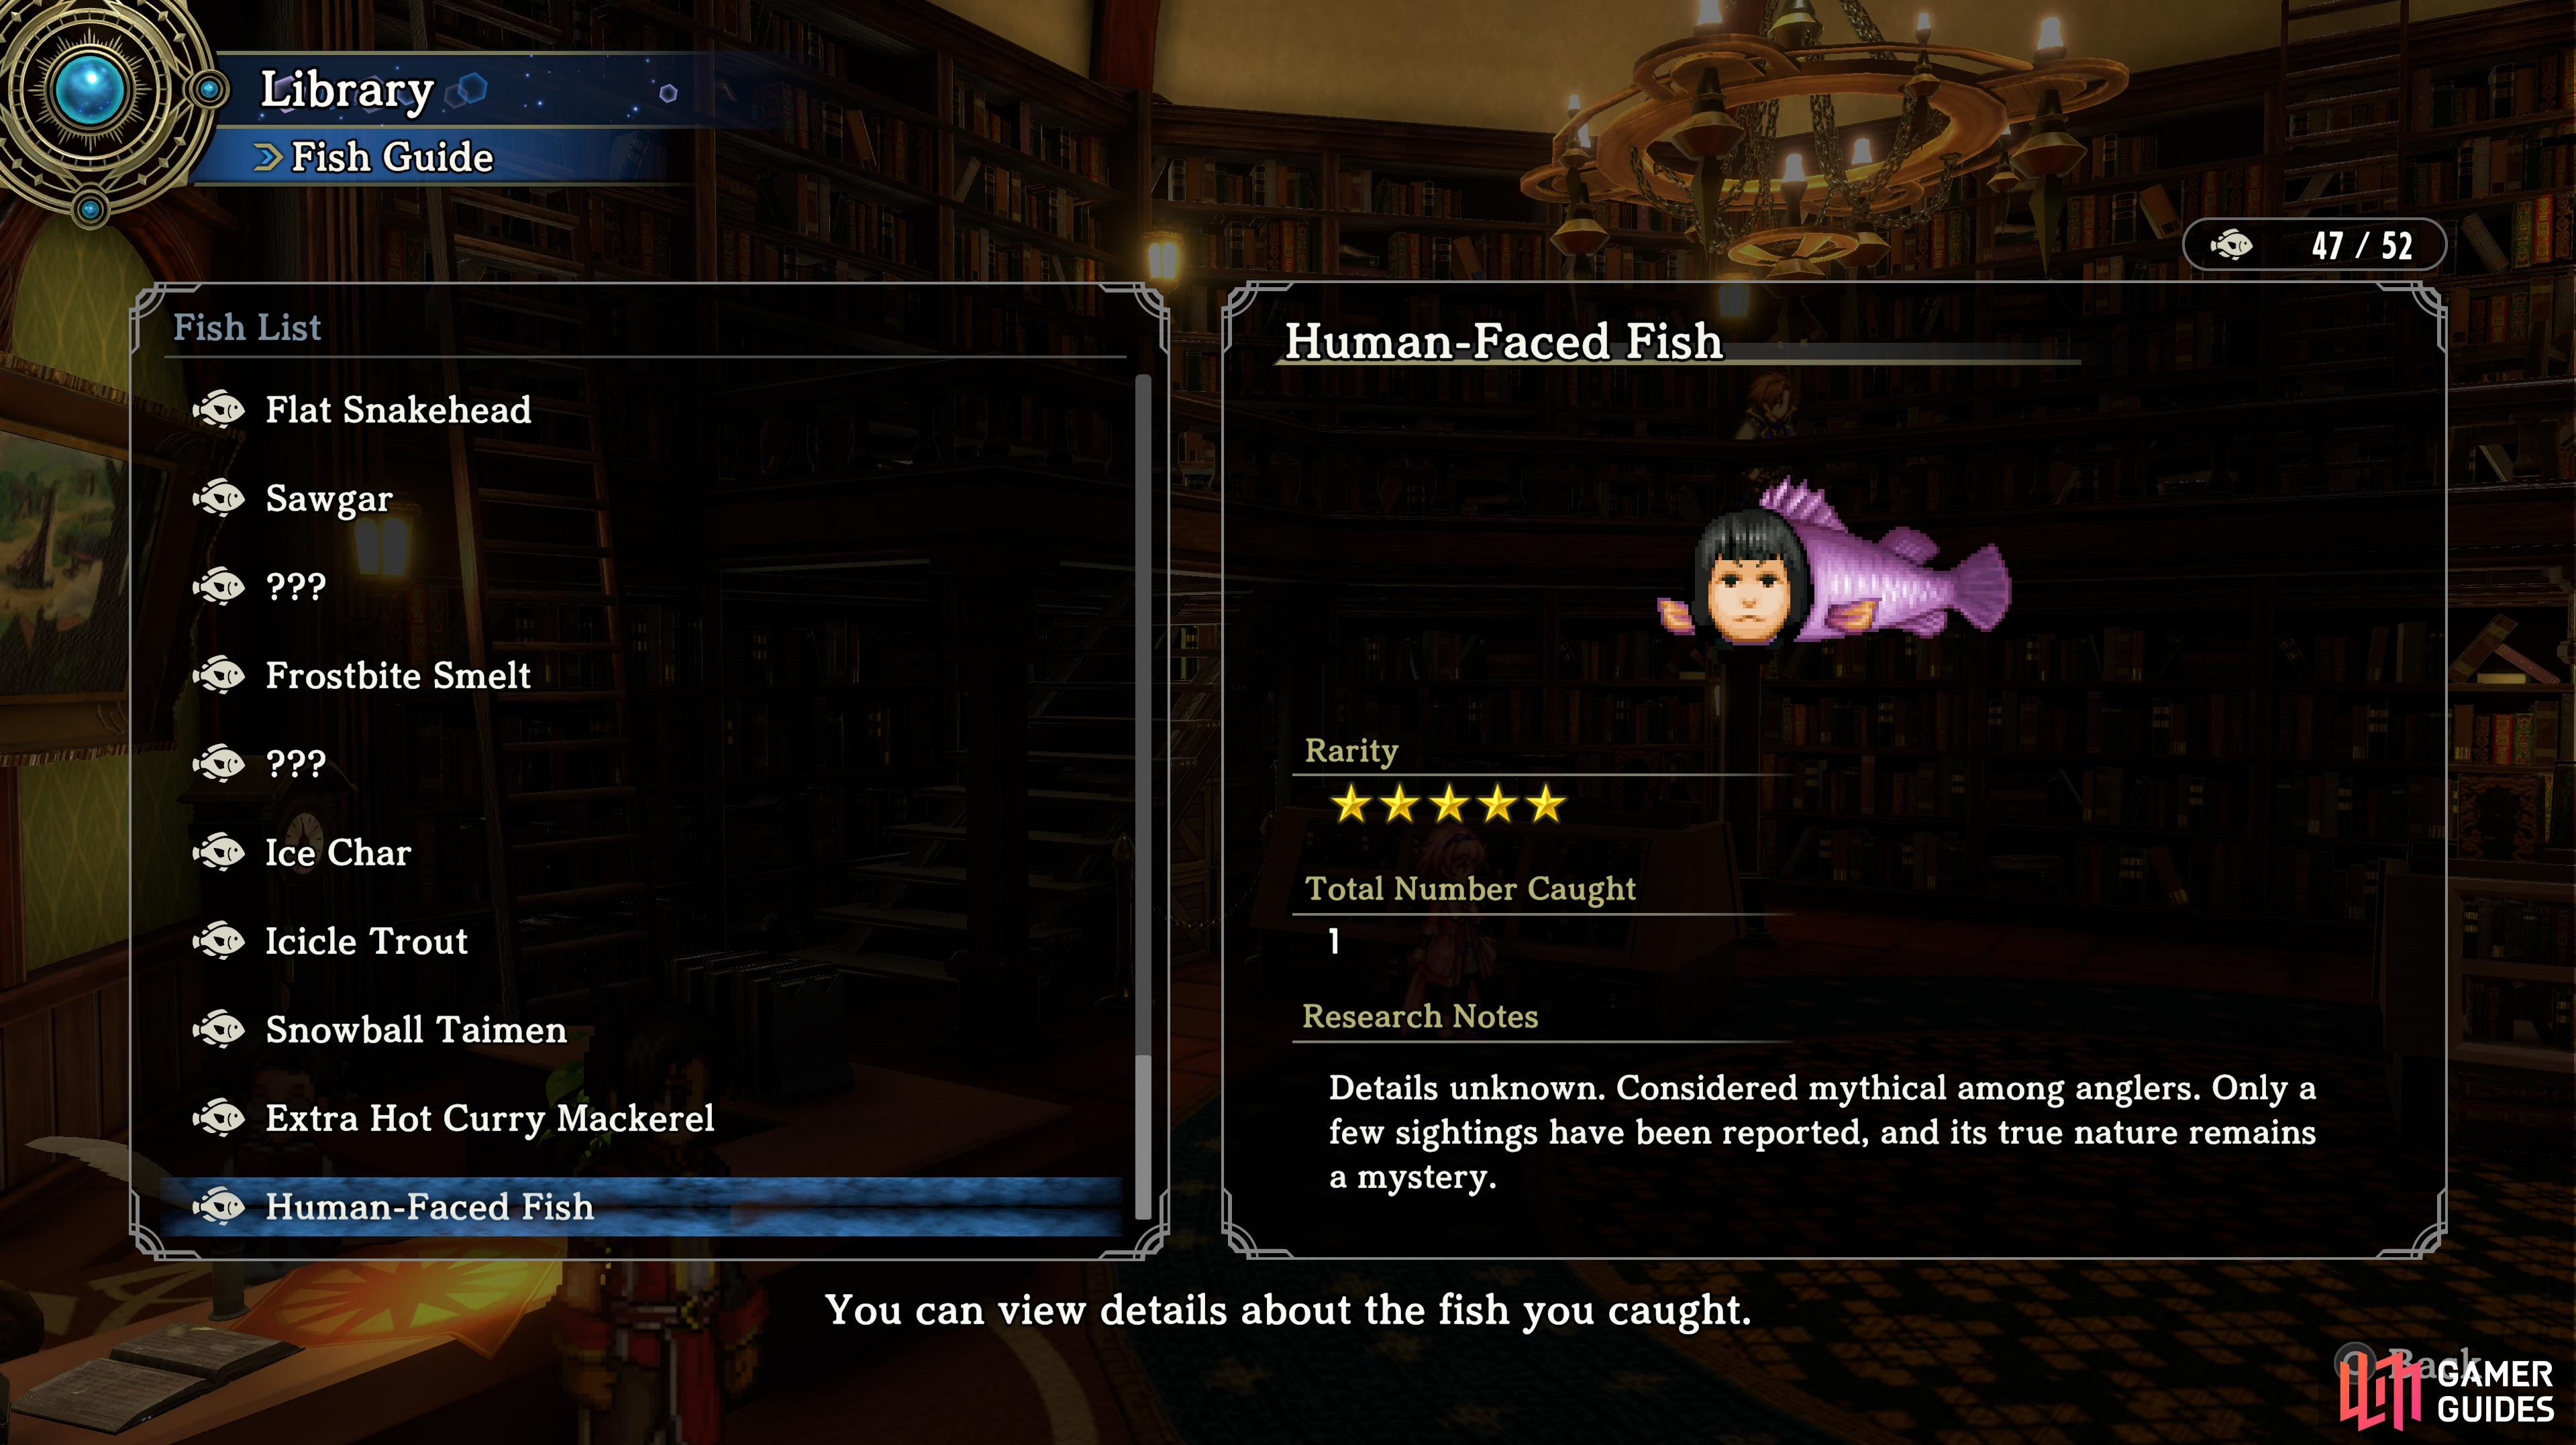 The Human-Faced Fish is the rarest in the game.